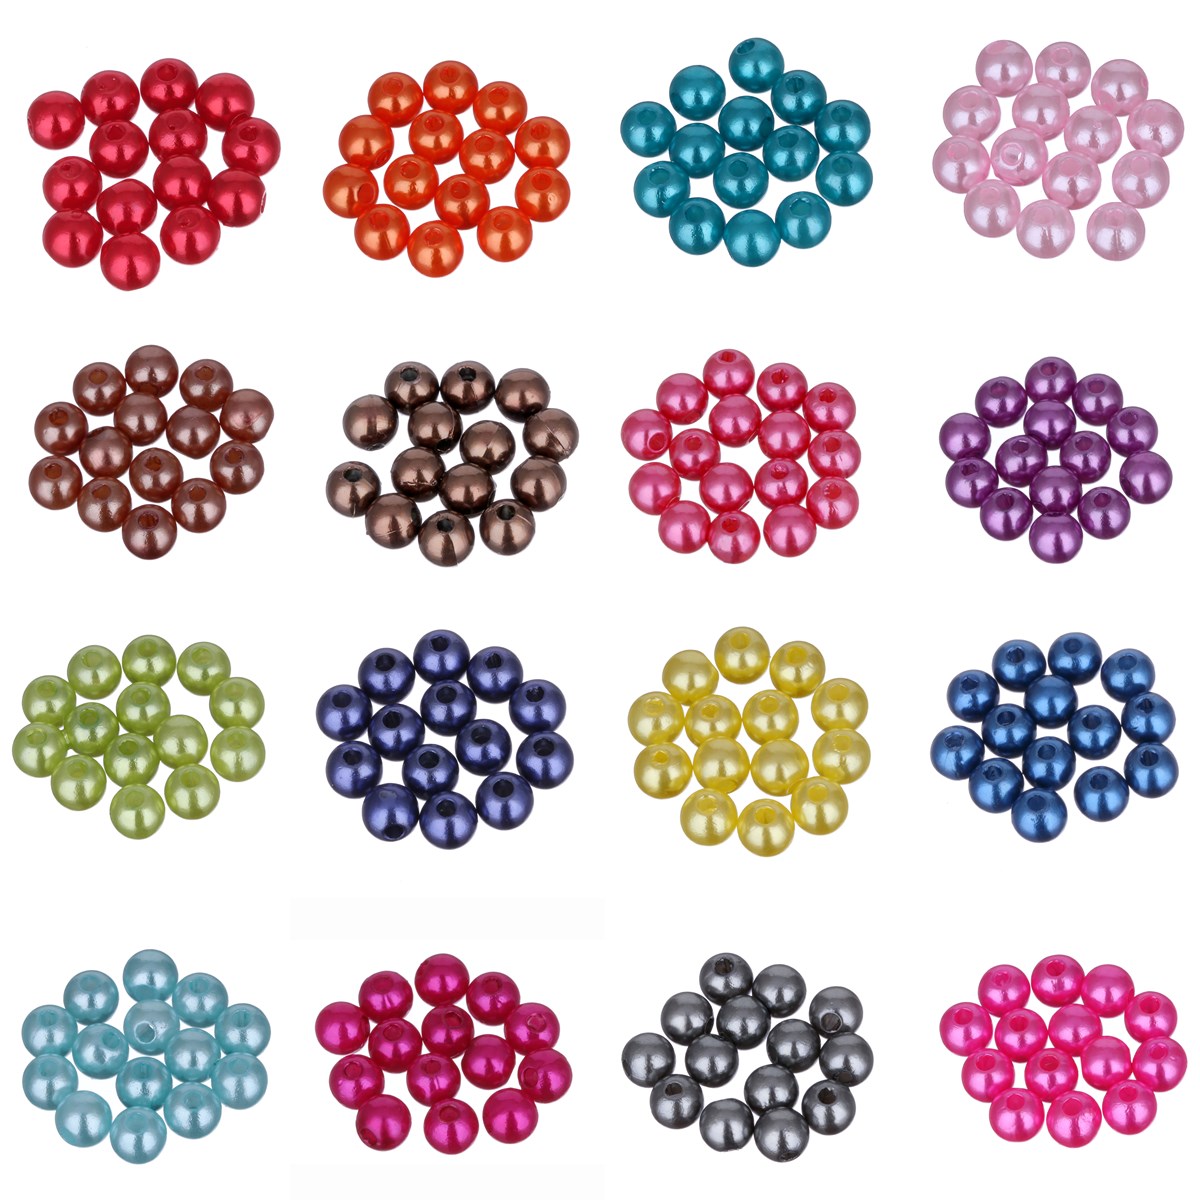 Image of Hot Sale 200PCS 6MM Mixed Color Fashion Bright Candy Color Acrylic Pears Spacer Loose Beads DIY Bracelets & Necklaces Making